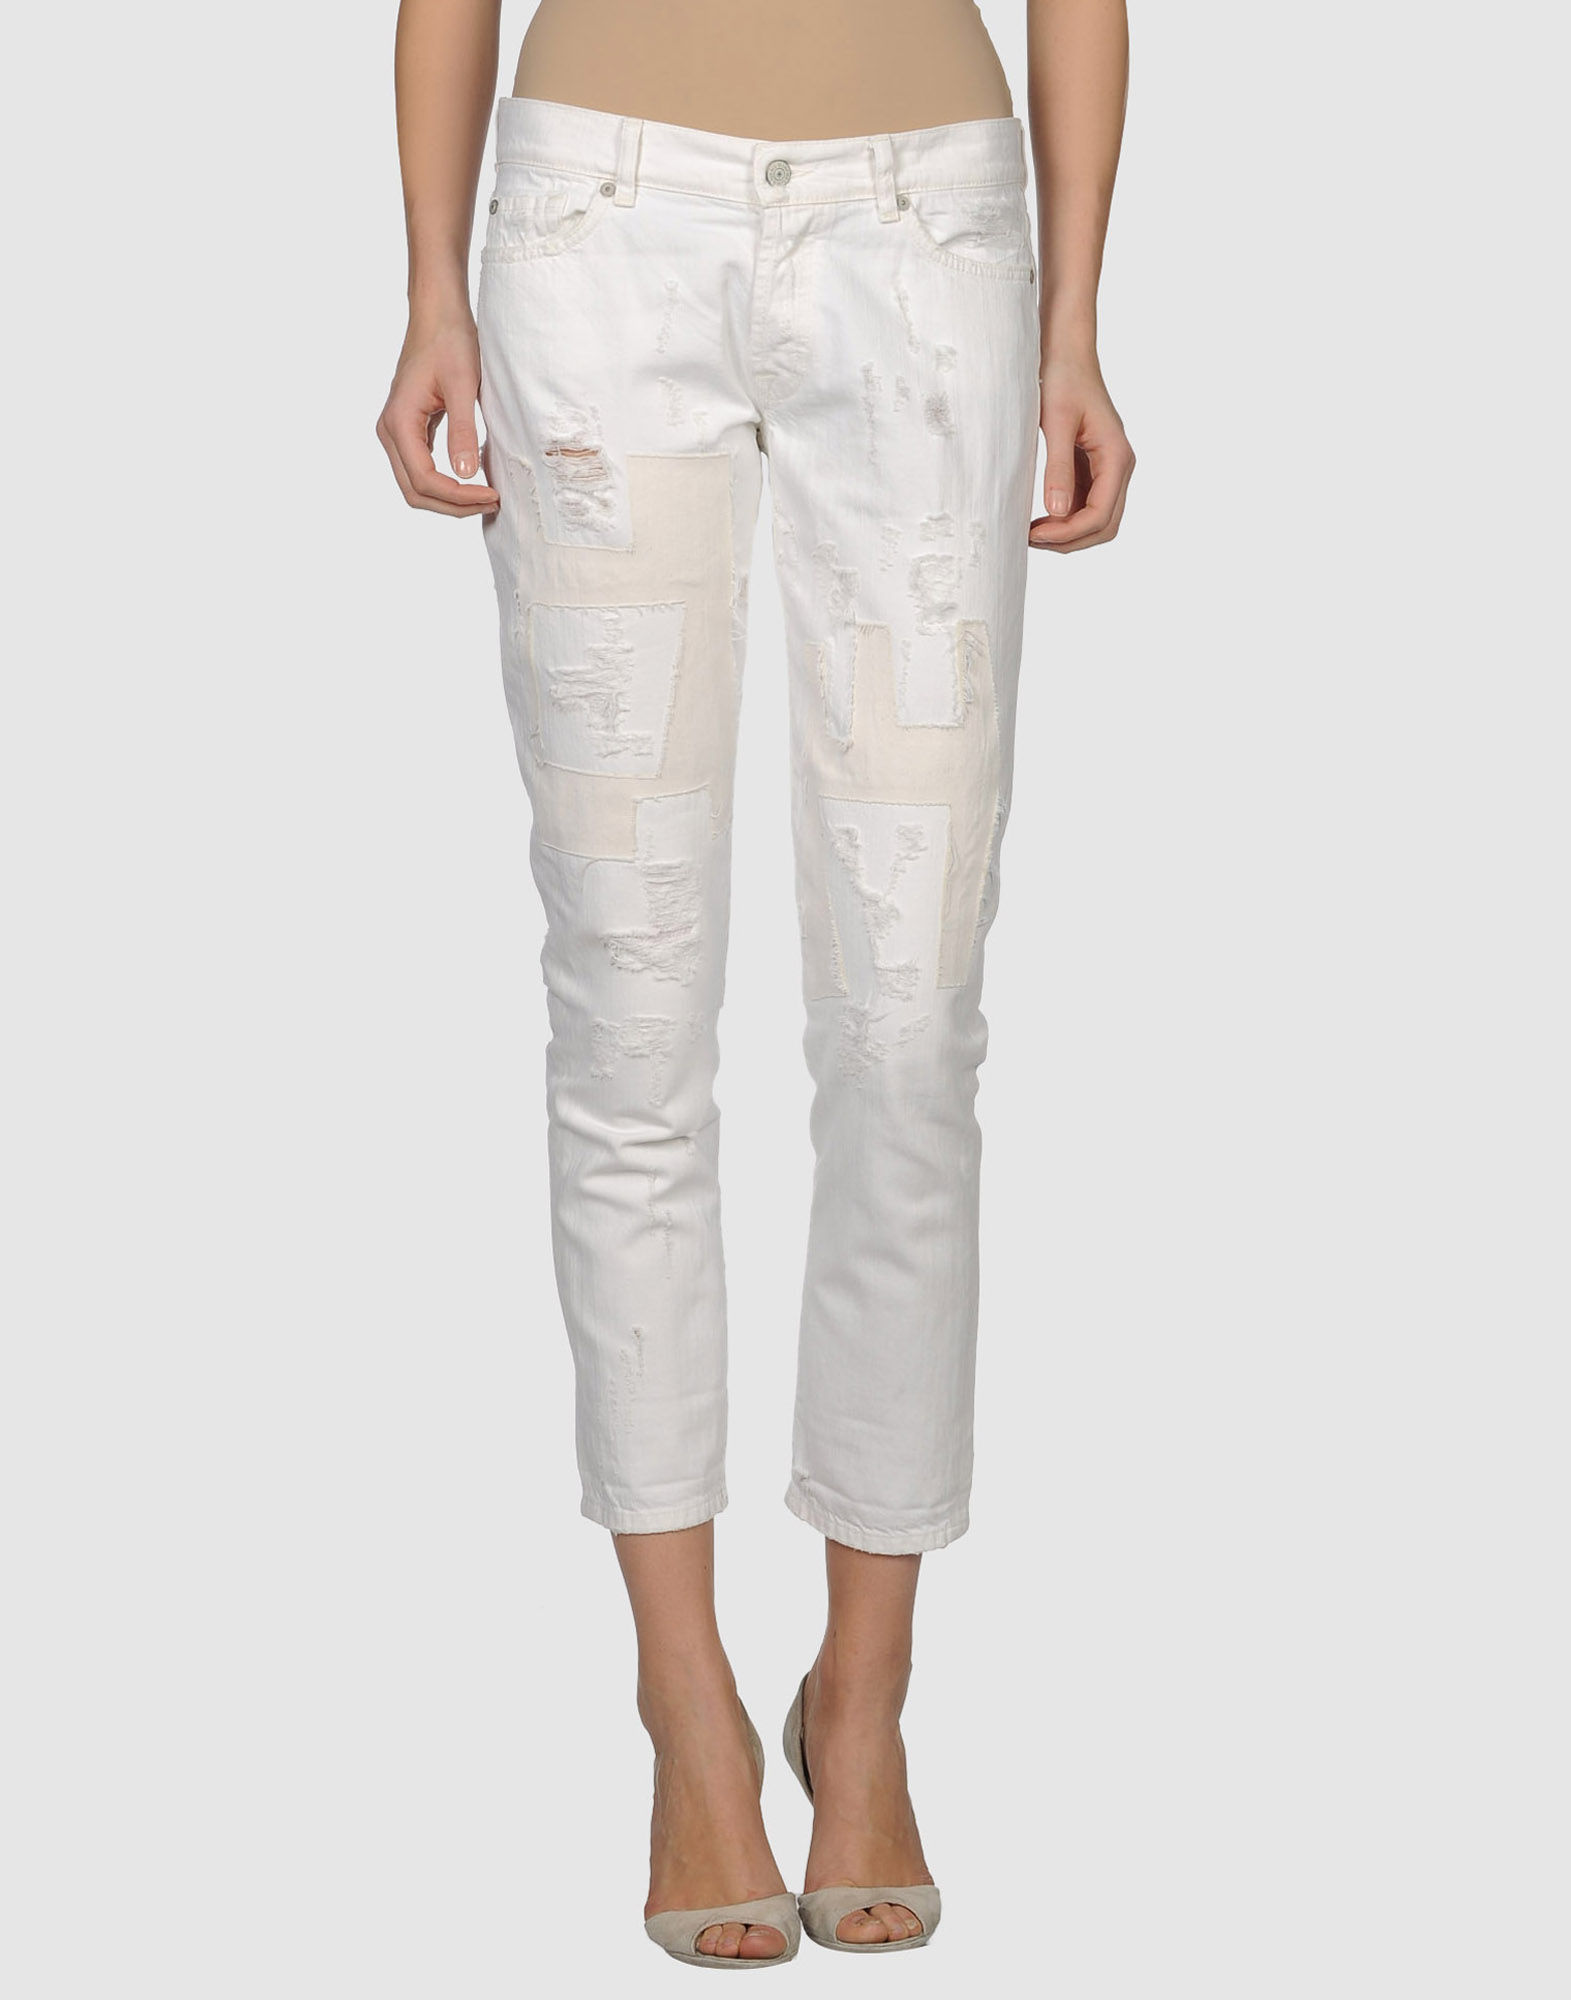 Jeans Femme YOOX - Pantalon jeans 7 FOR ALL MANKIND sur YOOX